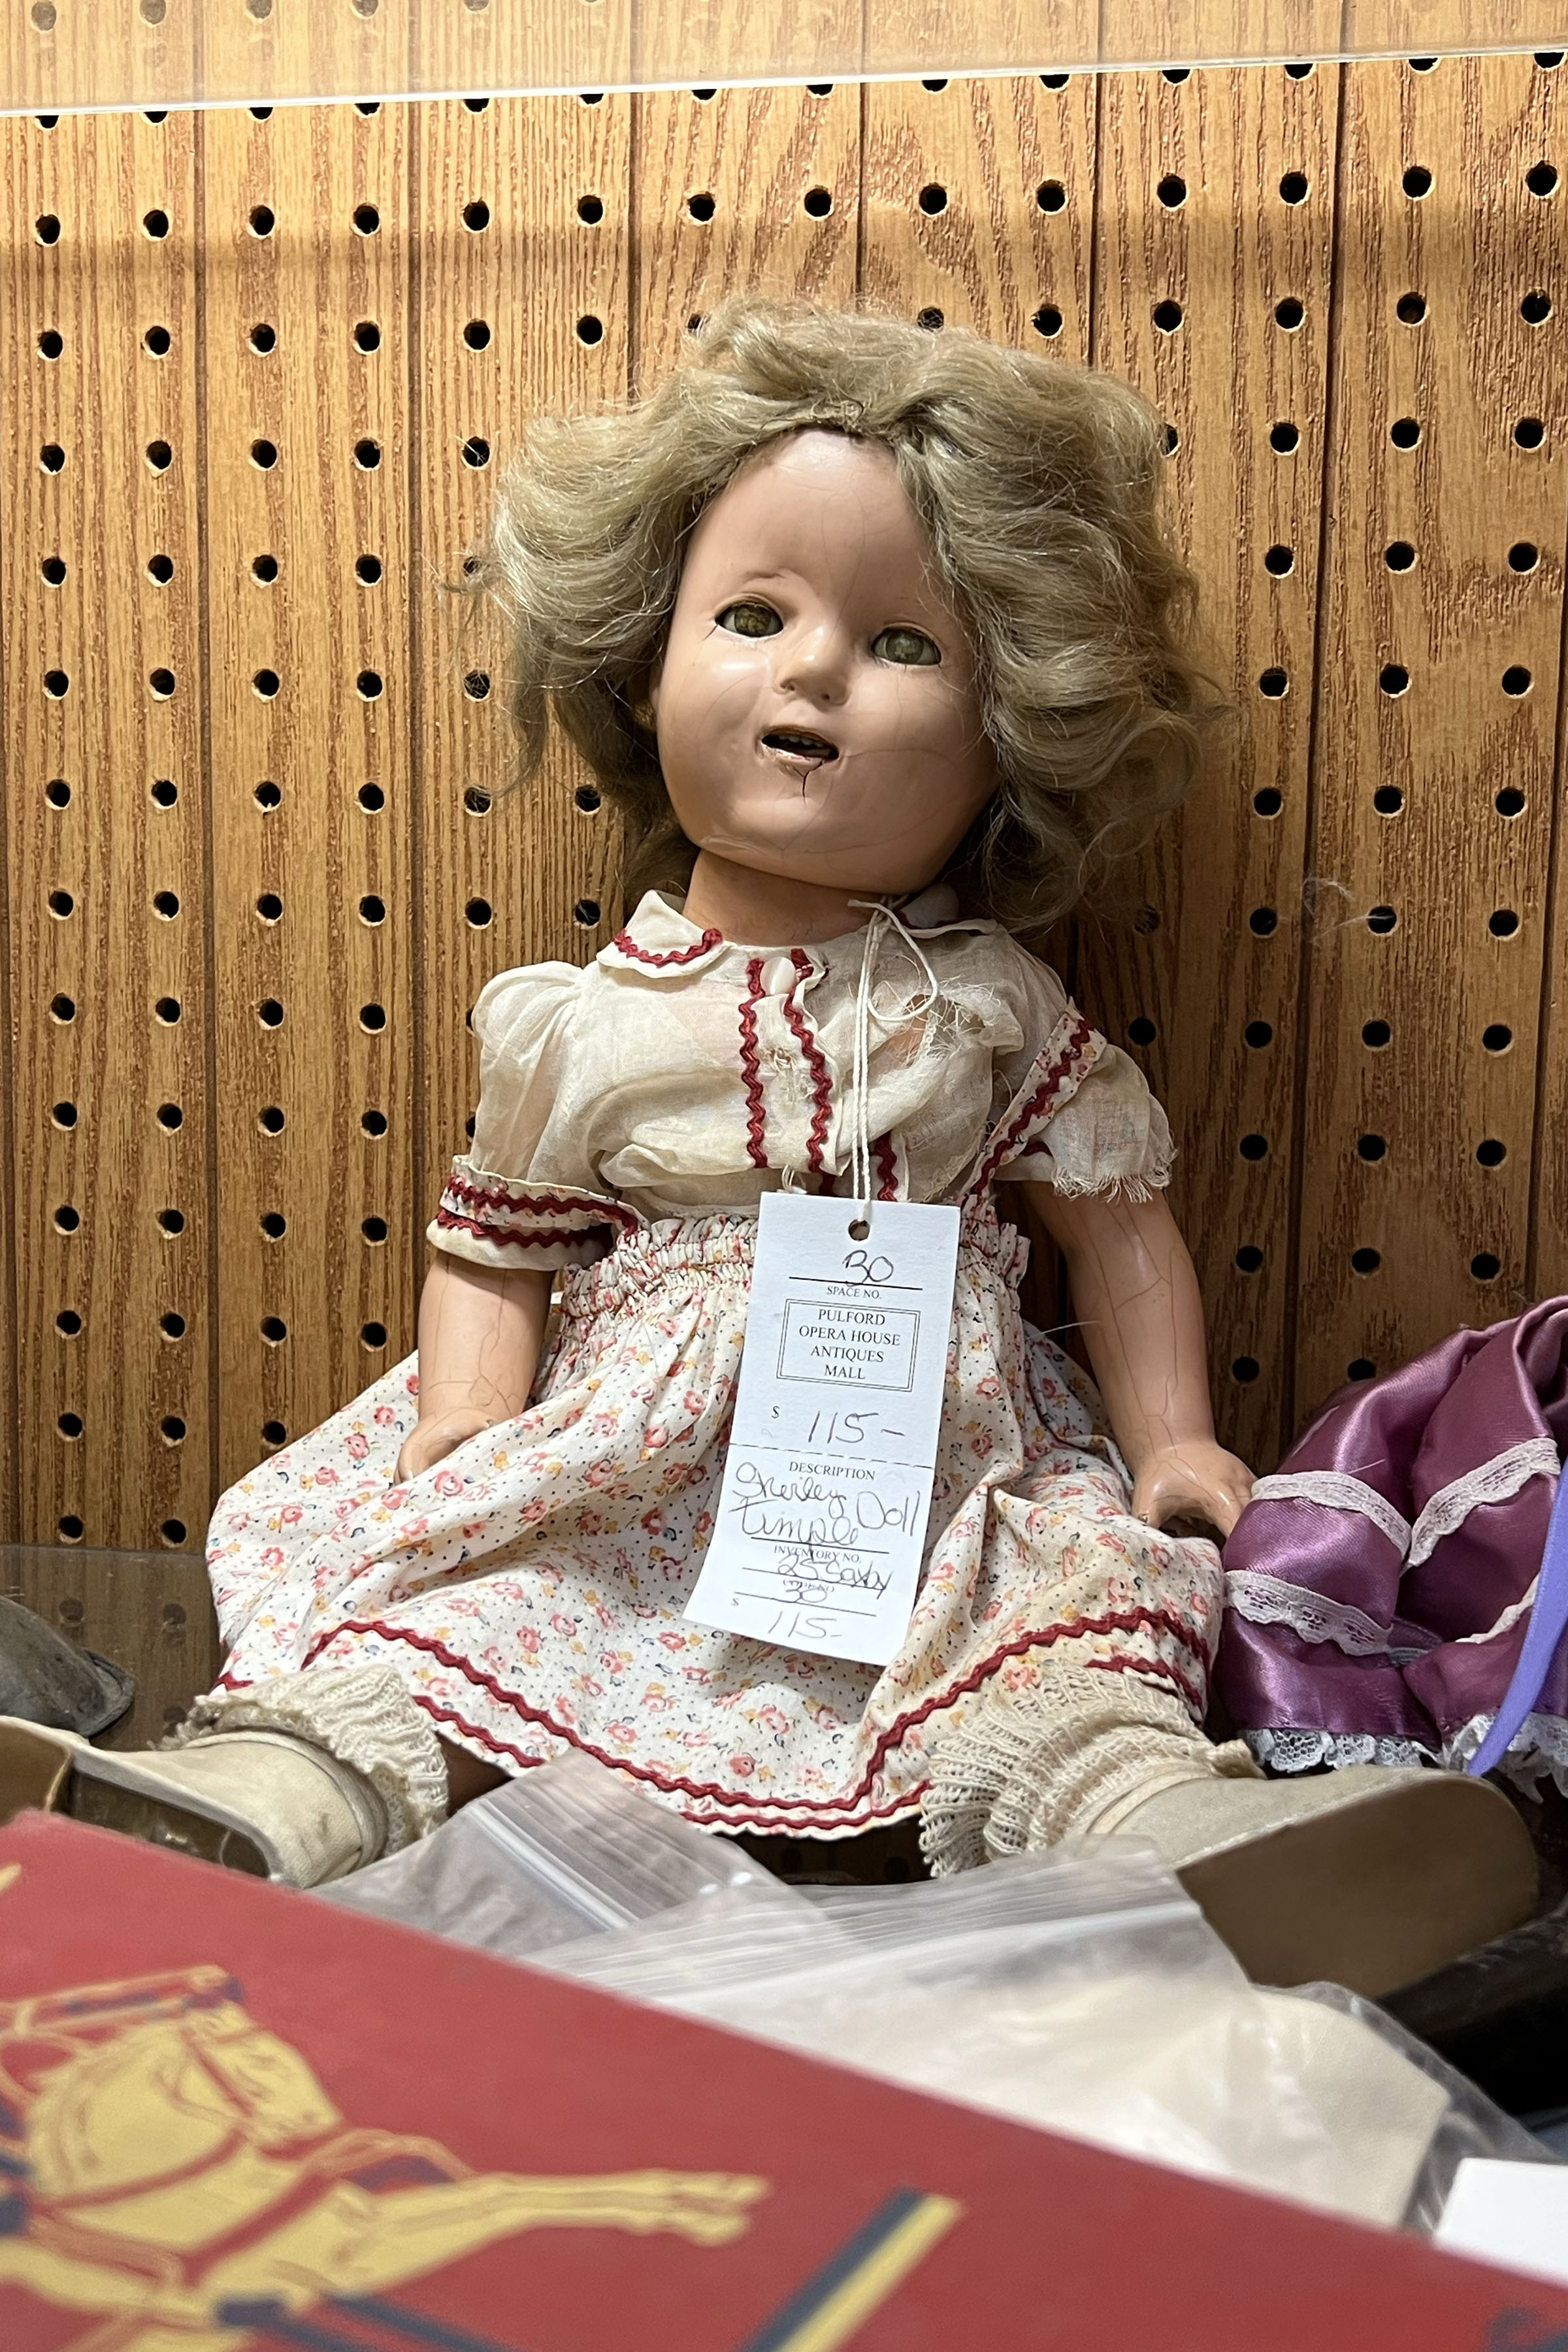 A doll with cracks on the face and arms goes for $115